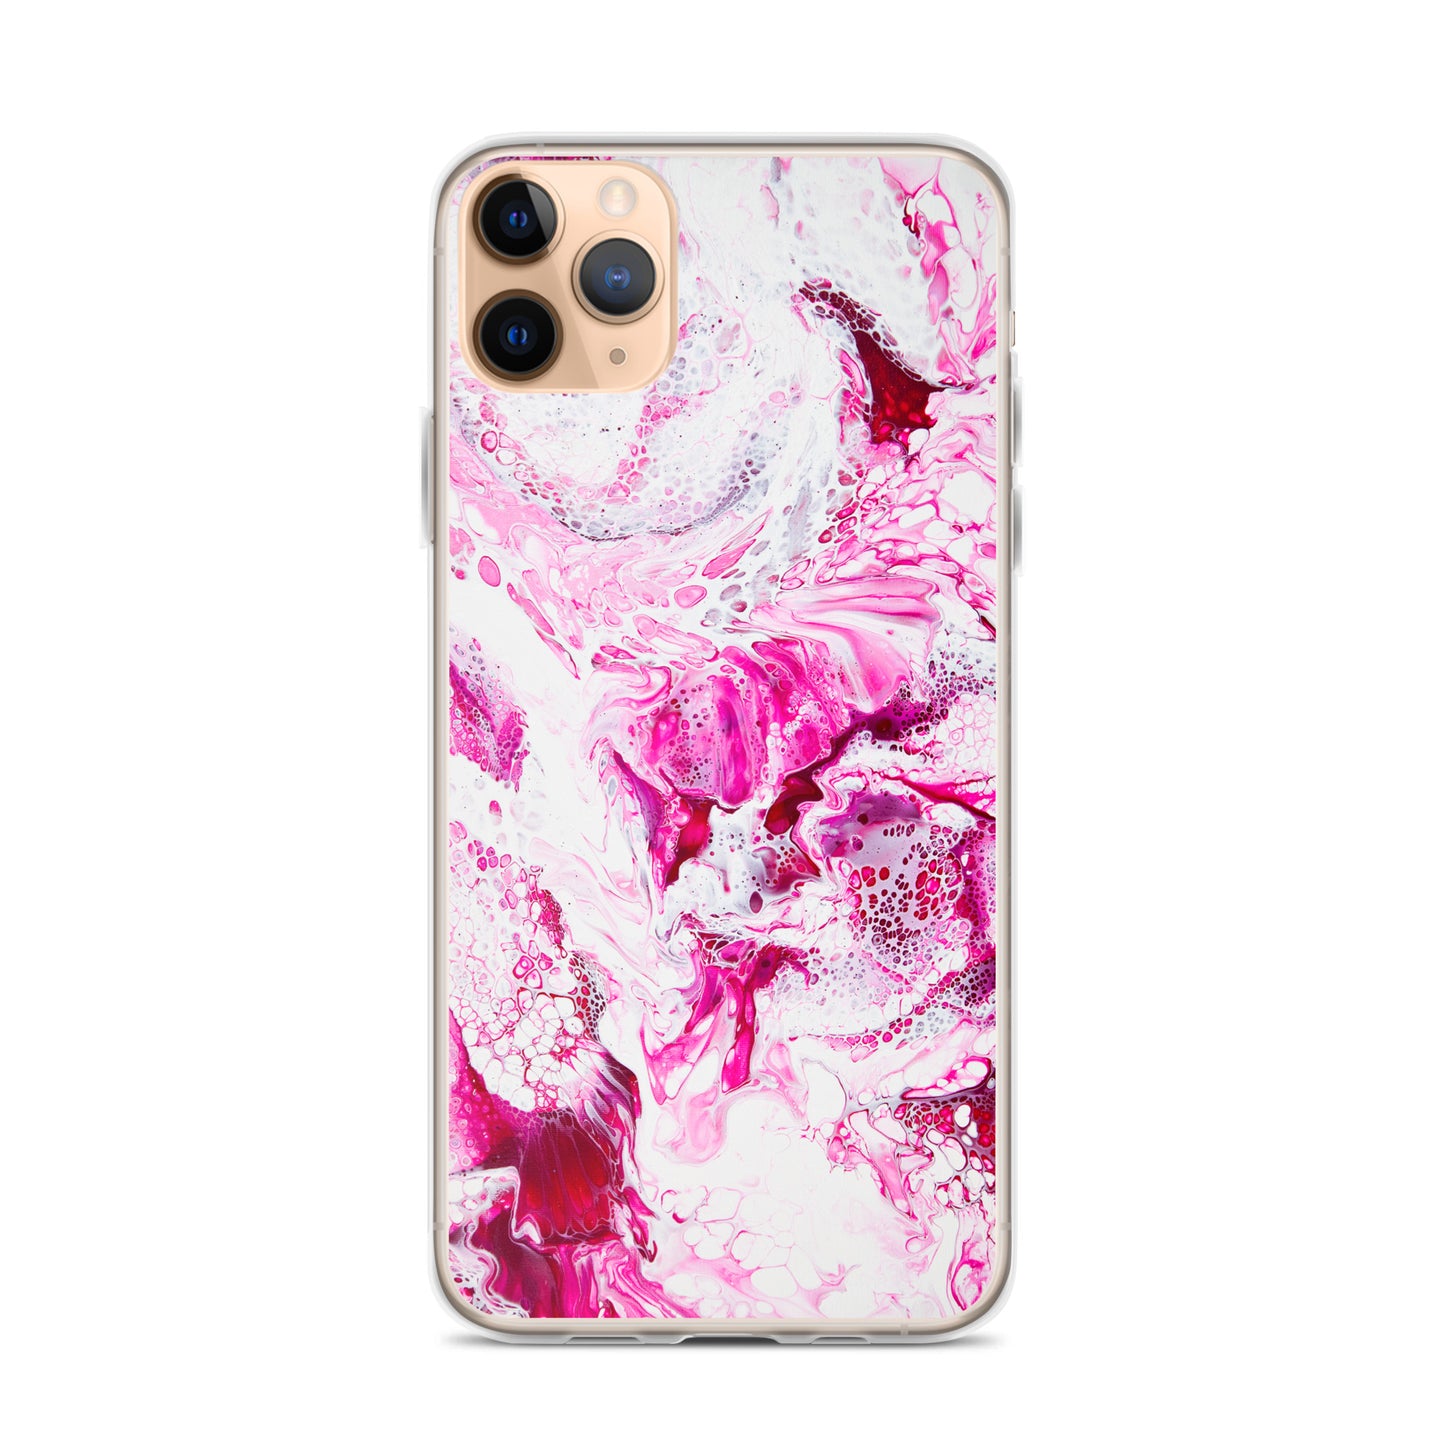 NightOwl Studio Custom Phone Case Compatible with iPhone, Ultra Slim Cover with Heavy Duty Scratch Resistant Shockproof Protection, Pink Distortion